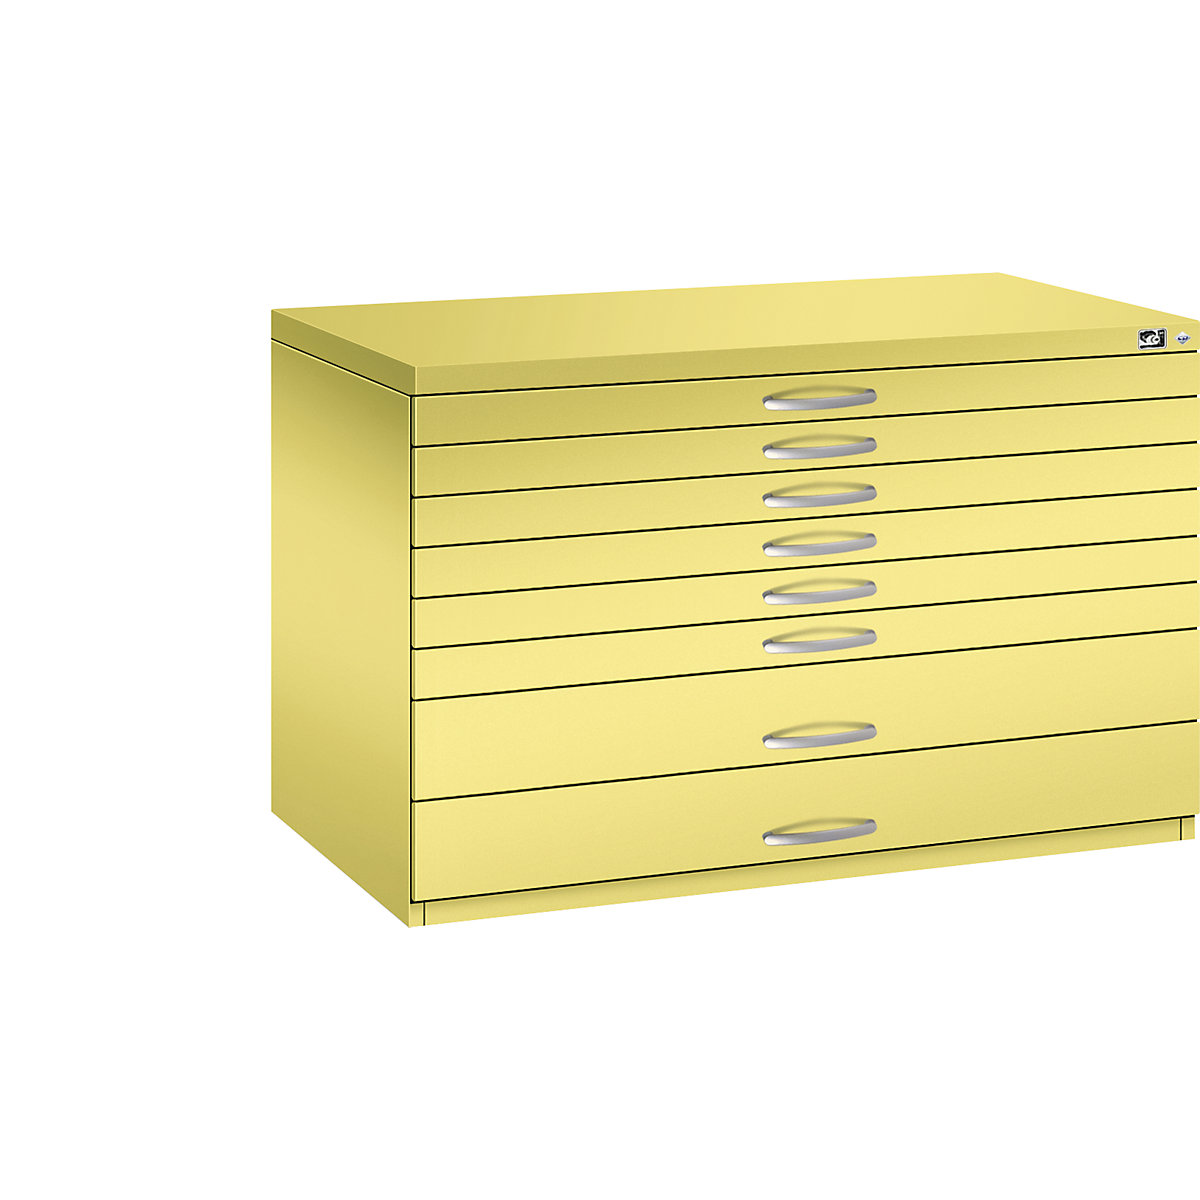 Drawing cabinet – C+P, A1, 8 drawers, height 760 mm, sulphur yellow-18